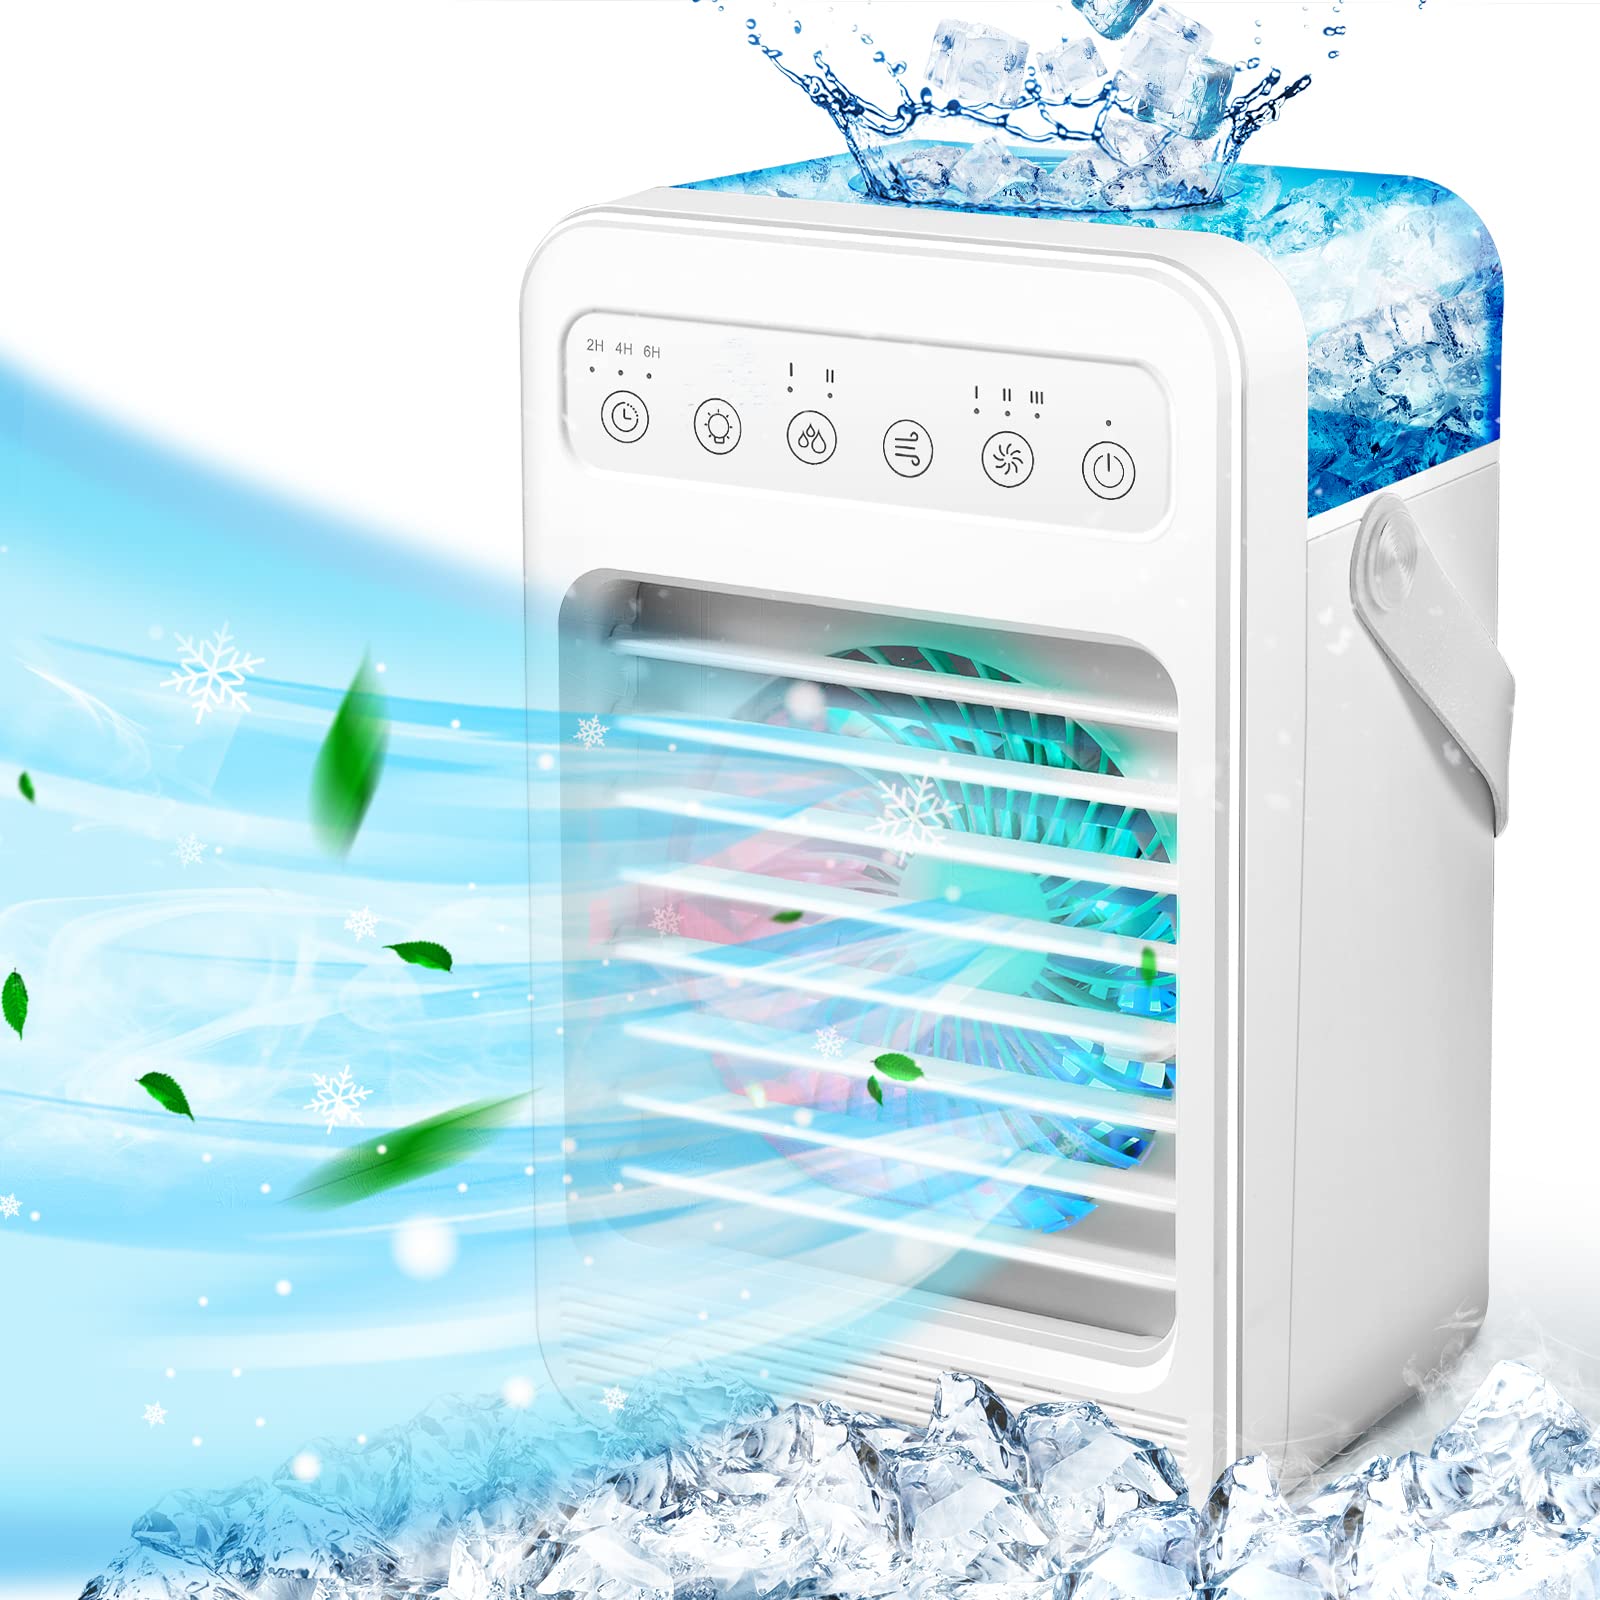 Portable Air Conditioners, 4-IN-1 Evaporative Personal Air Cooler Humidifier with 3 Speeds 7 Colors Light, 600ML Mini Personal Air Conditioner Fan, USB Quiet Air Cooler for Room Office Desk